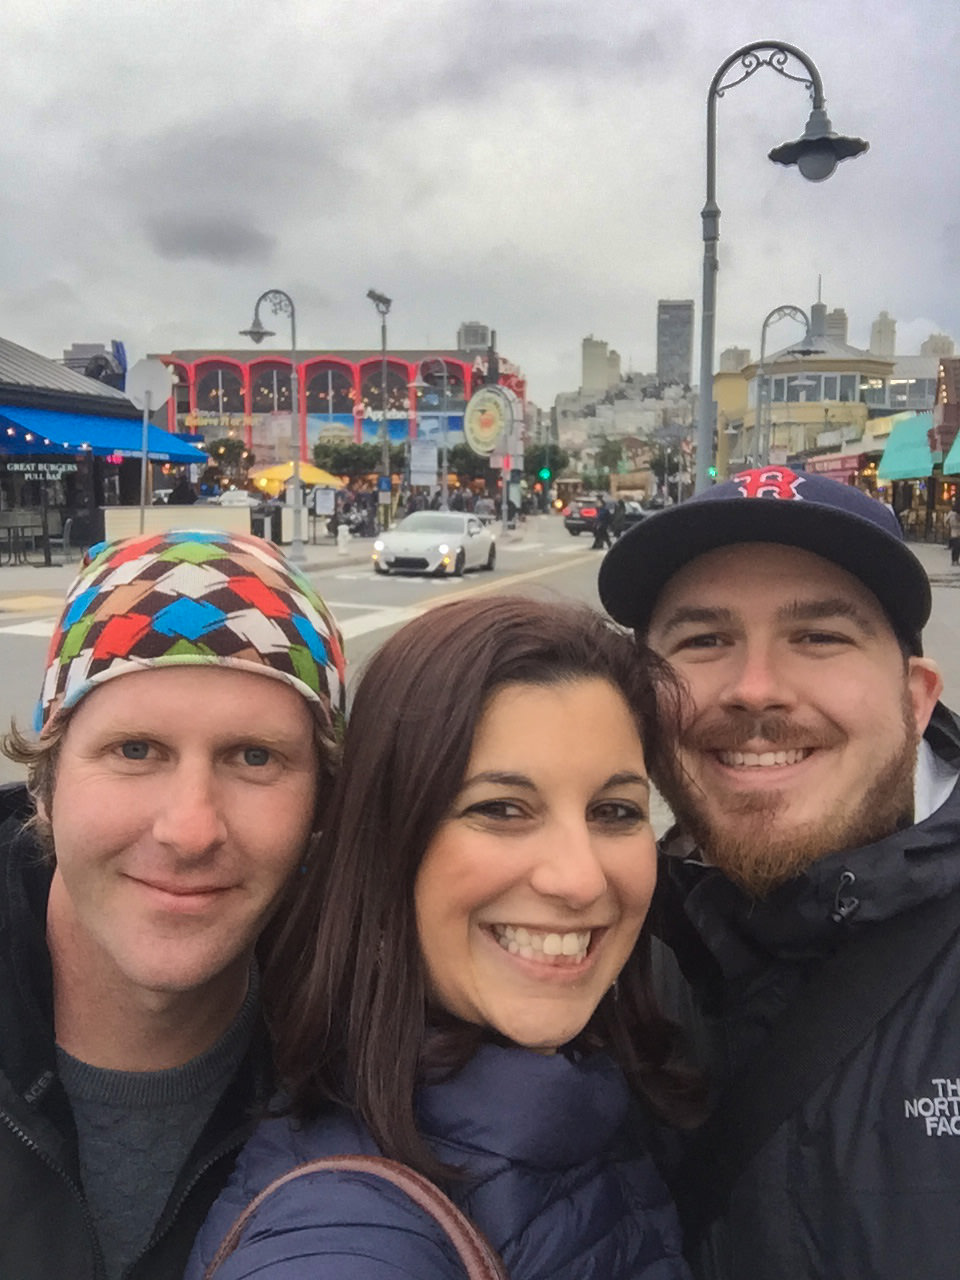 Ben Elizabeth and Tyler at Fisherman's Wharf in San Francisco USA